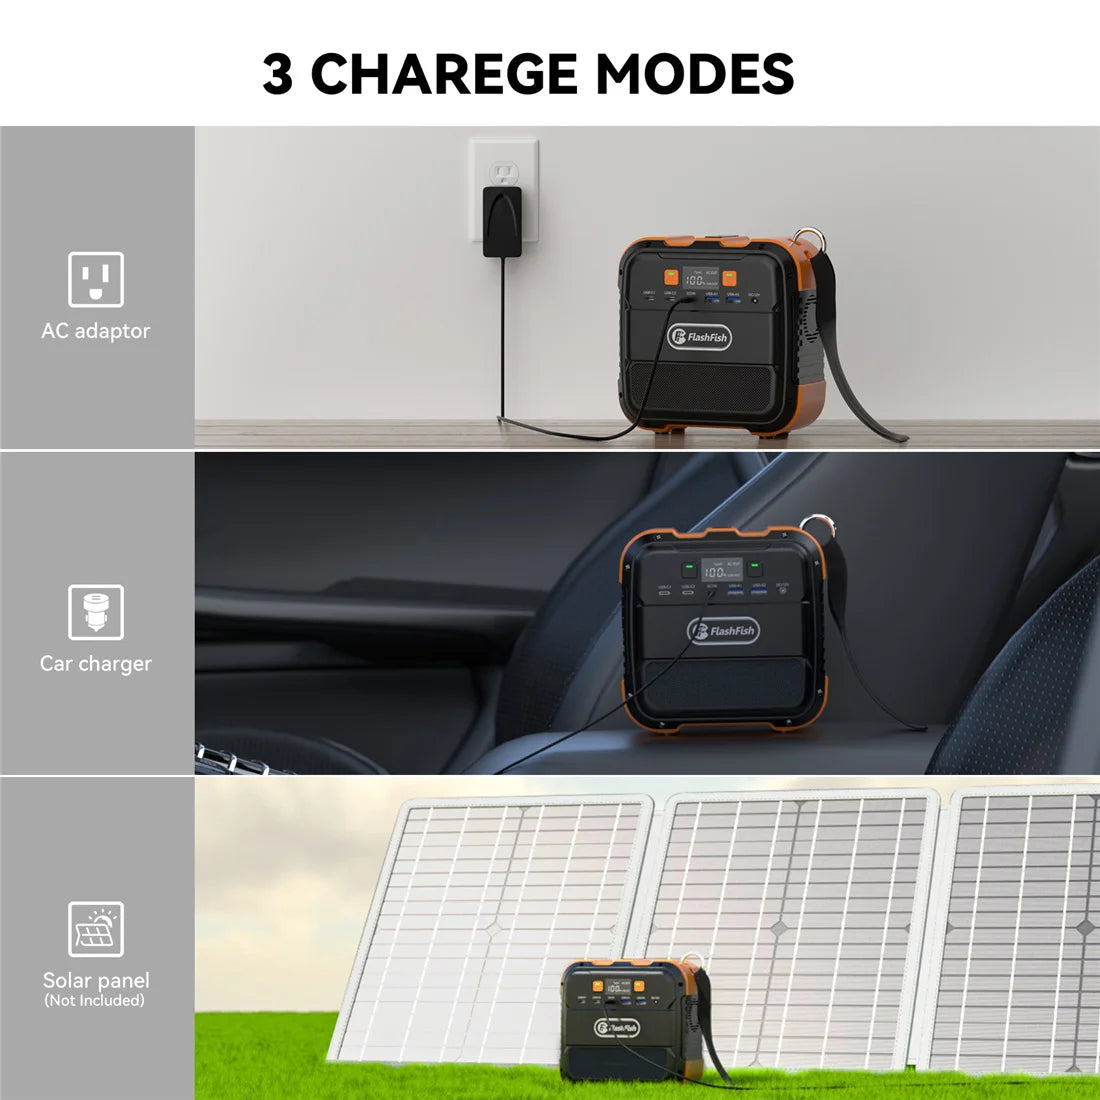 Powerful charging device with AC mode and compatible with solar panels, car chargers, and other devices.